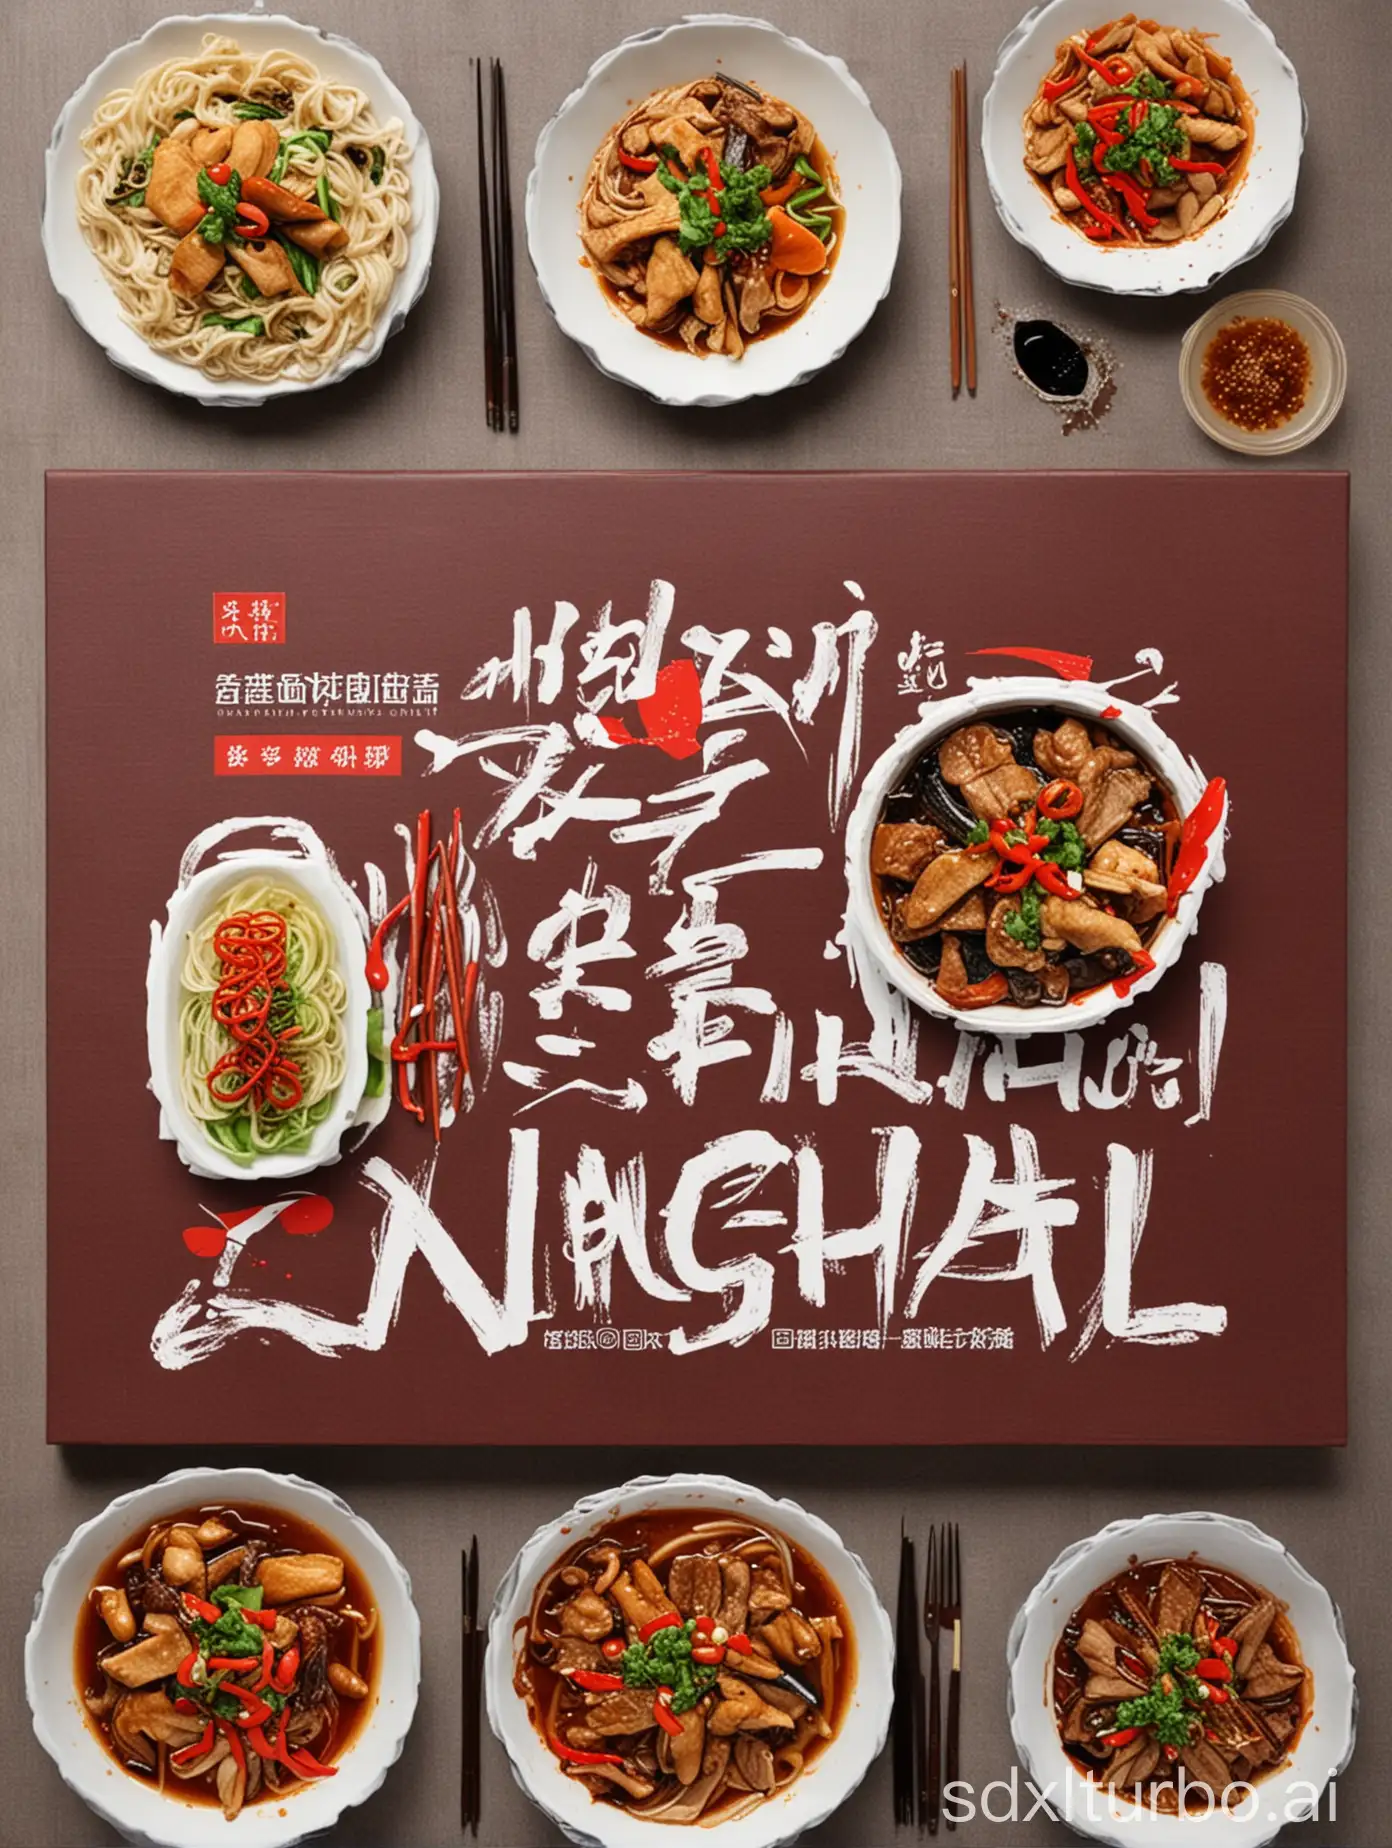 Delicious-Ninghai-Cuisine-from-China-Vibrant-Video-Cover